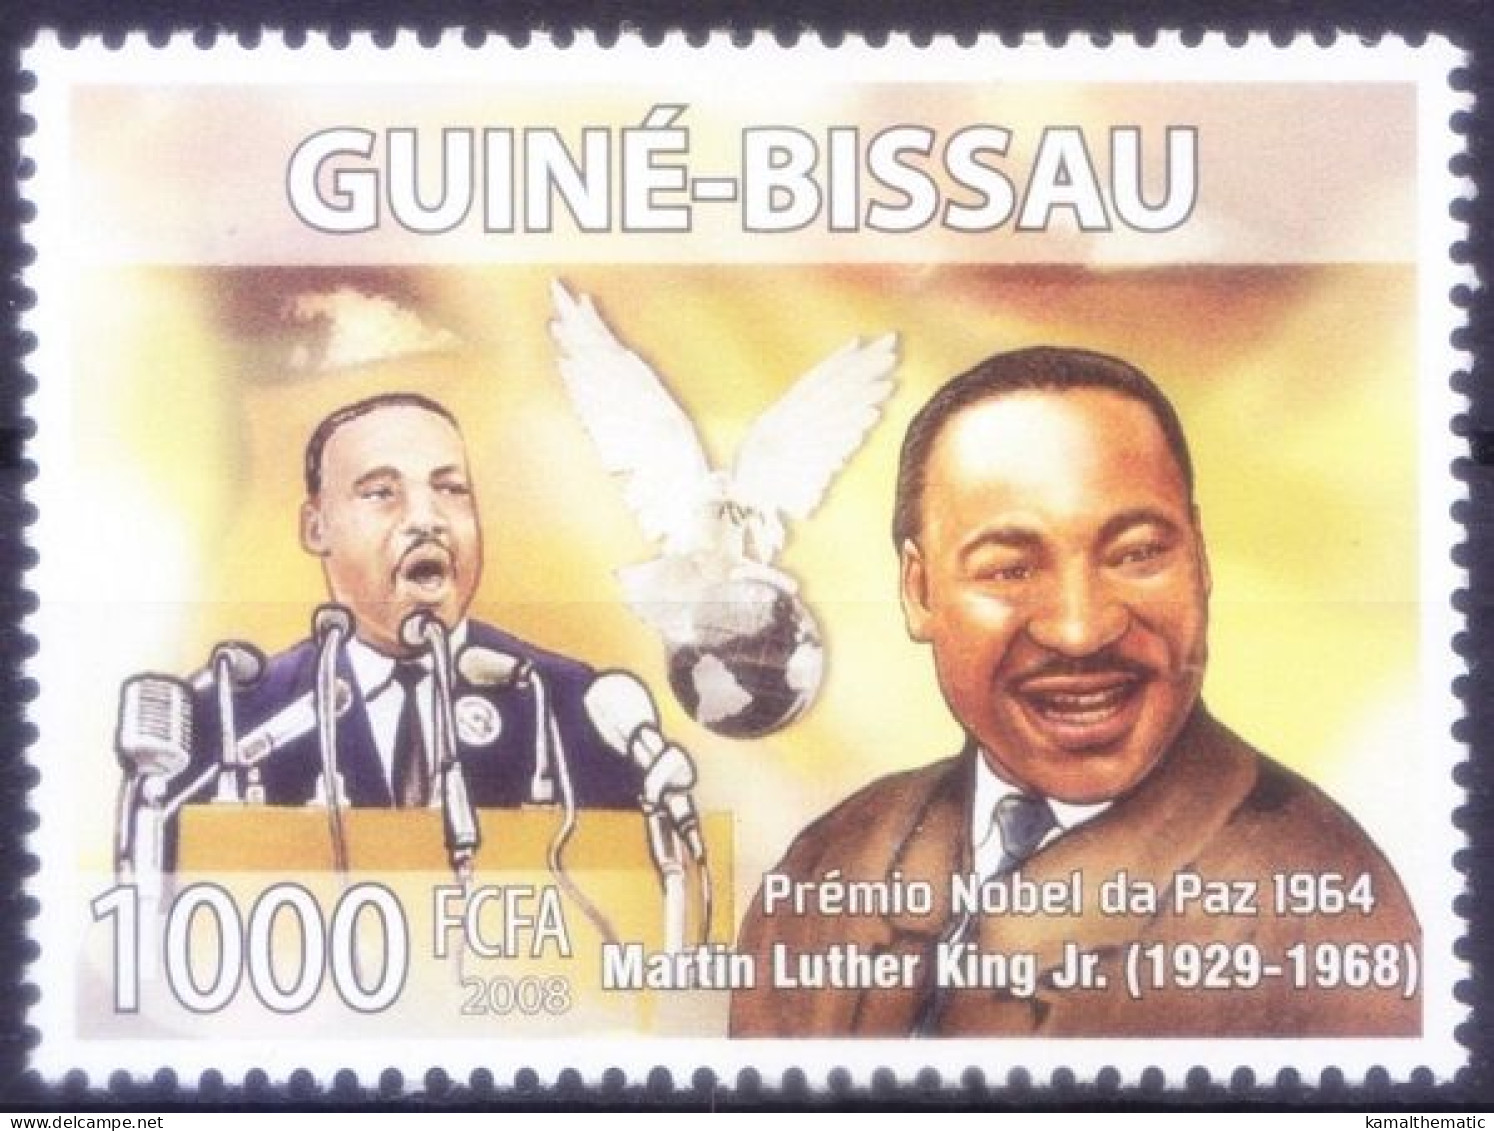 Martin Luther King Nobel Peace Winner, Guinea Bissau 2008 MNH - Martin Luther King